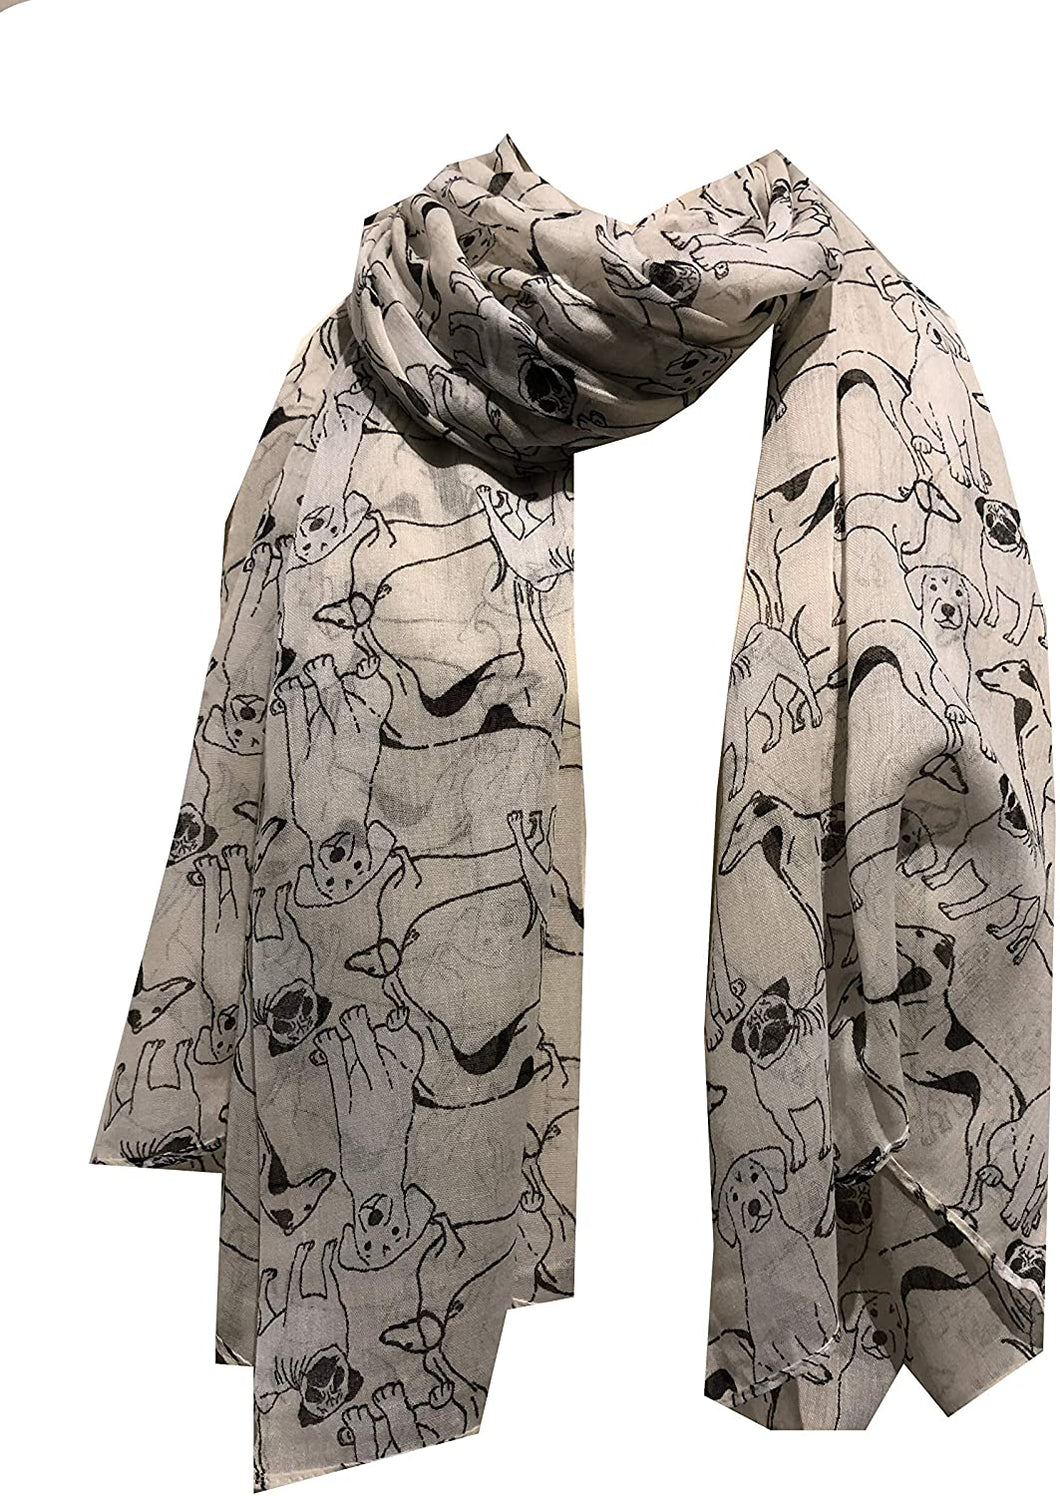 Pamper Yourself Now Cream Sketched Mixed Dog Design Scarf Pug, Sausage Dog, Labrador and whippit